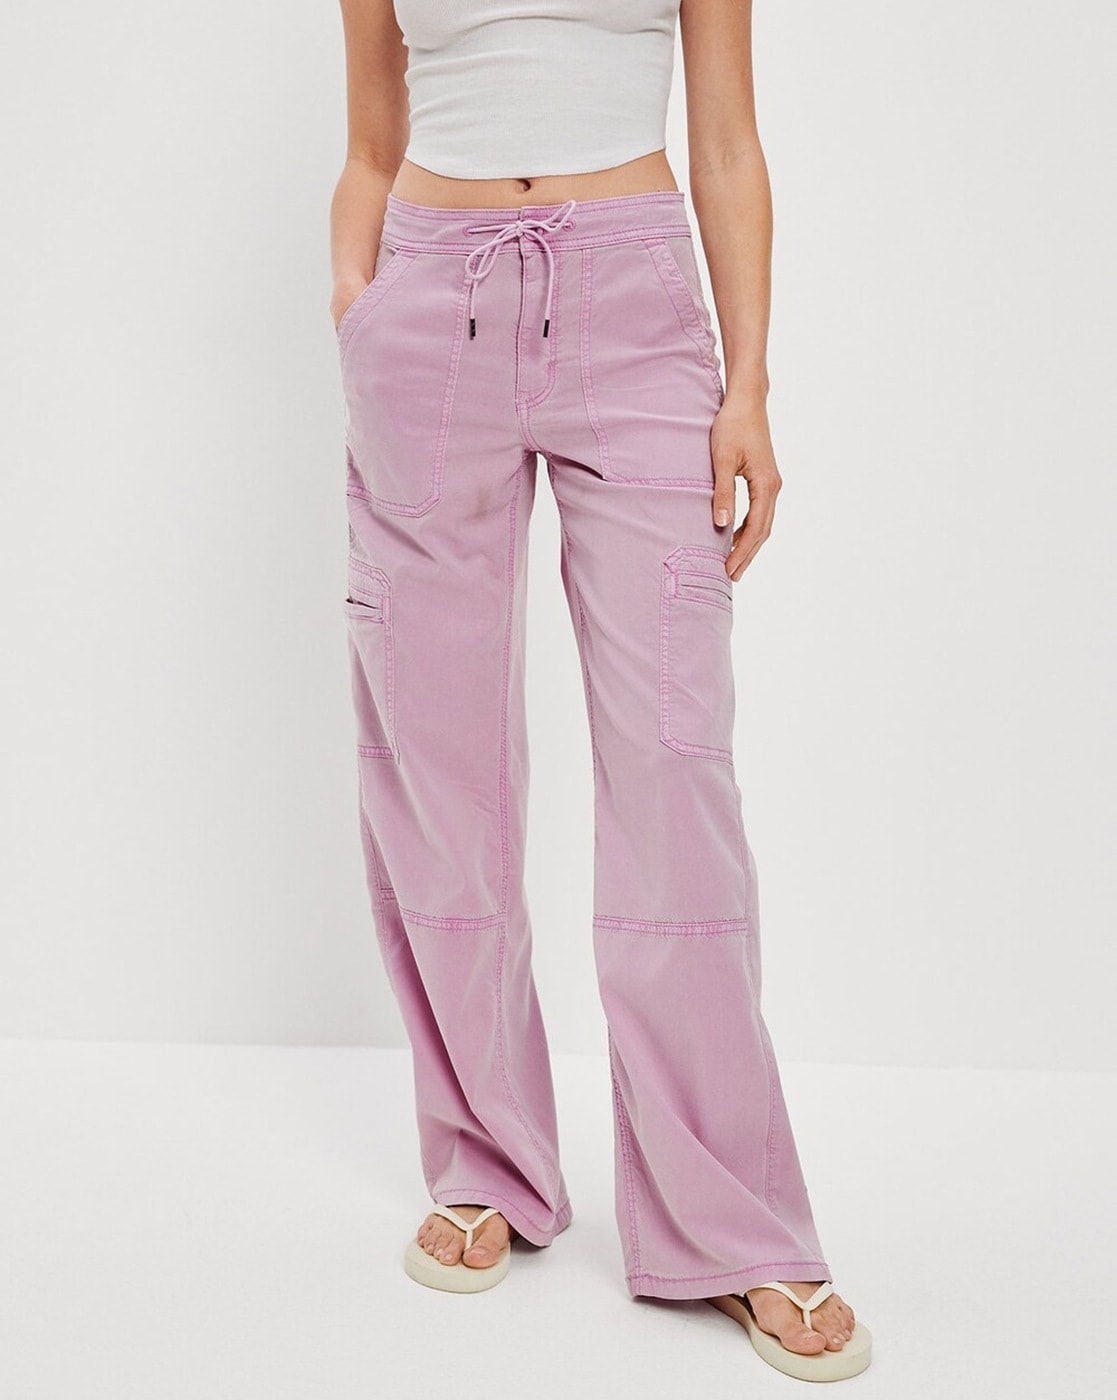 Buy Purple Trousers  Pants for Women by American Eagle Outfitters Online   Ajiocom